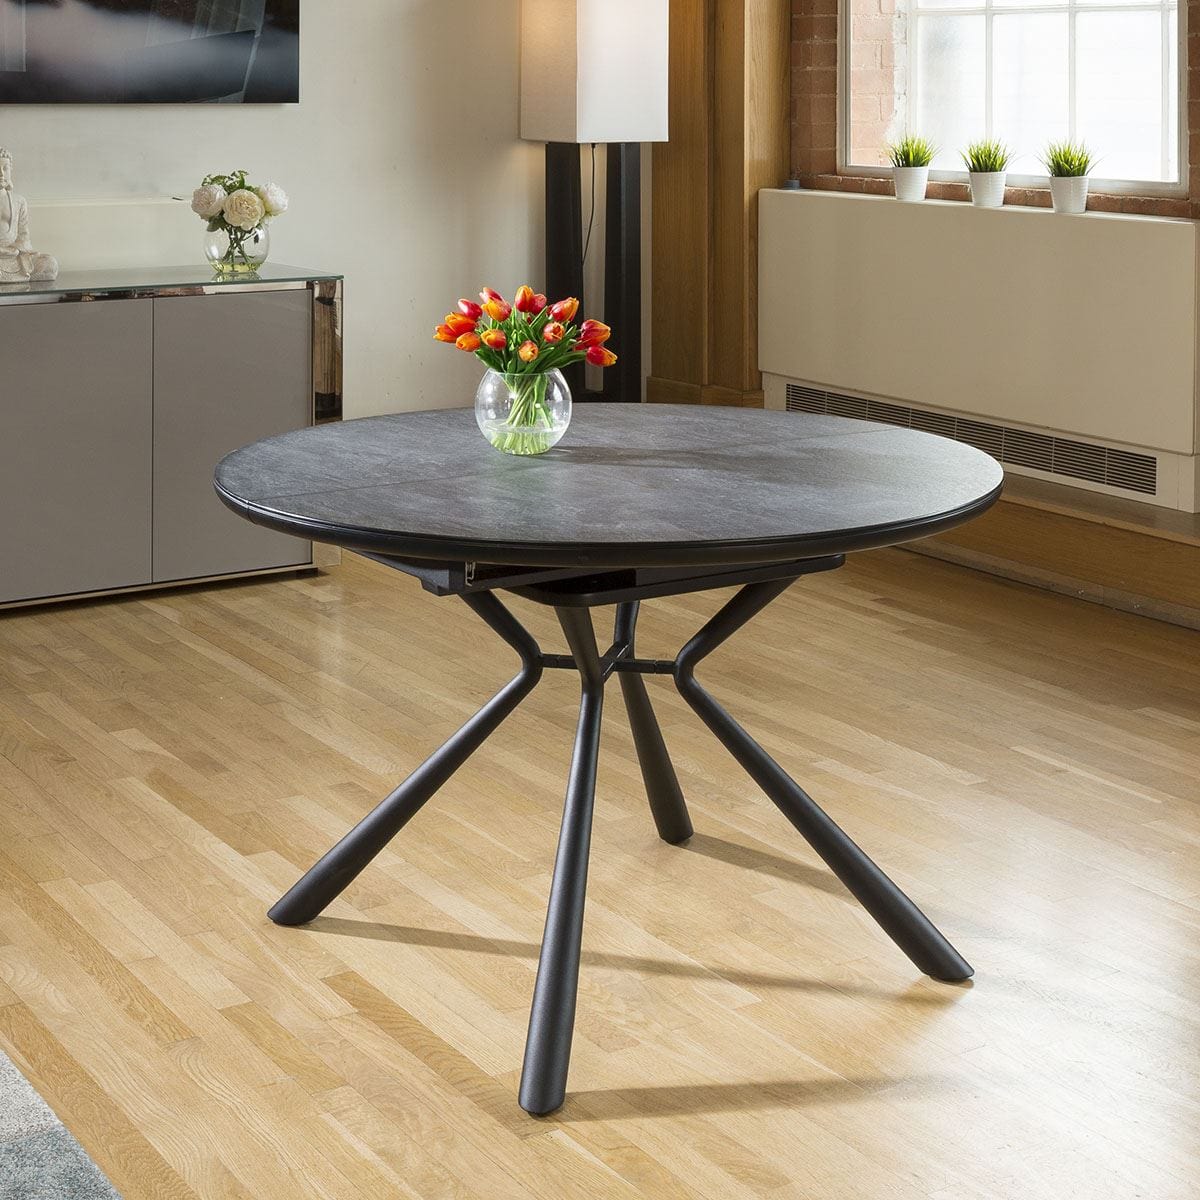 Quatropi Round Slate Effect Melamine Dining Table Extends +6 Grey Carver Chairs